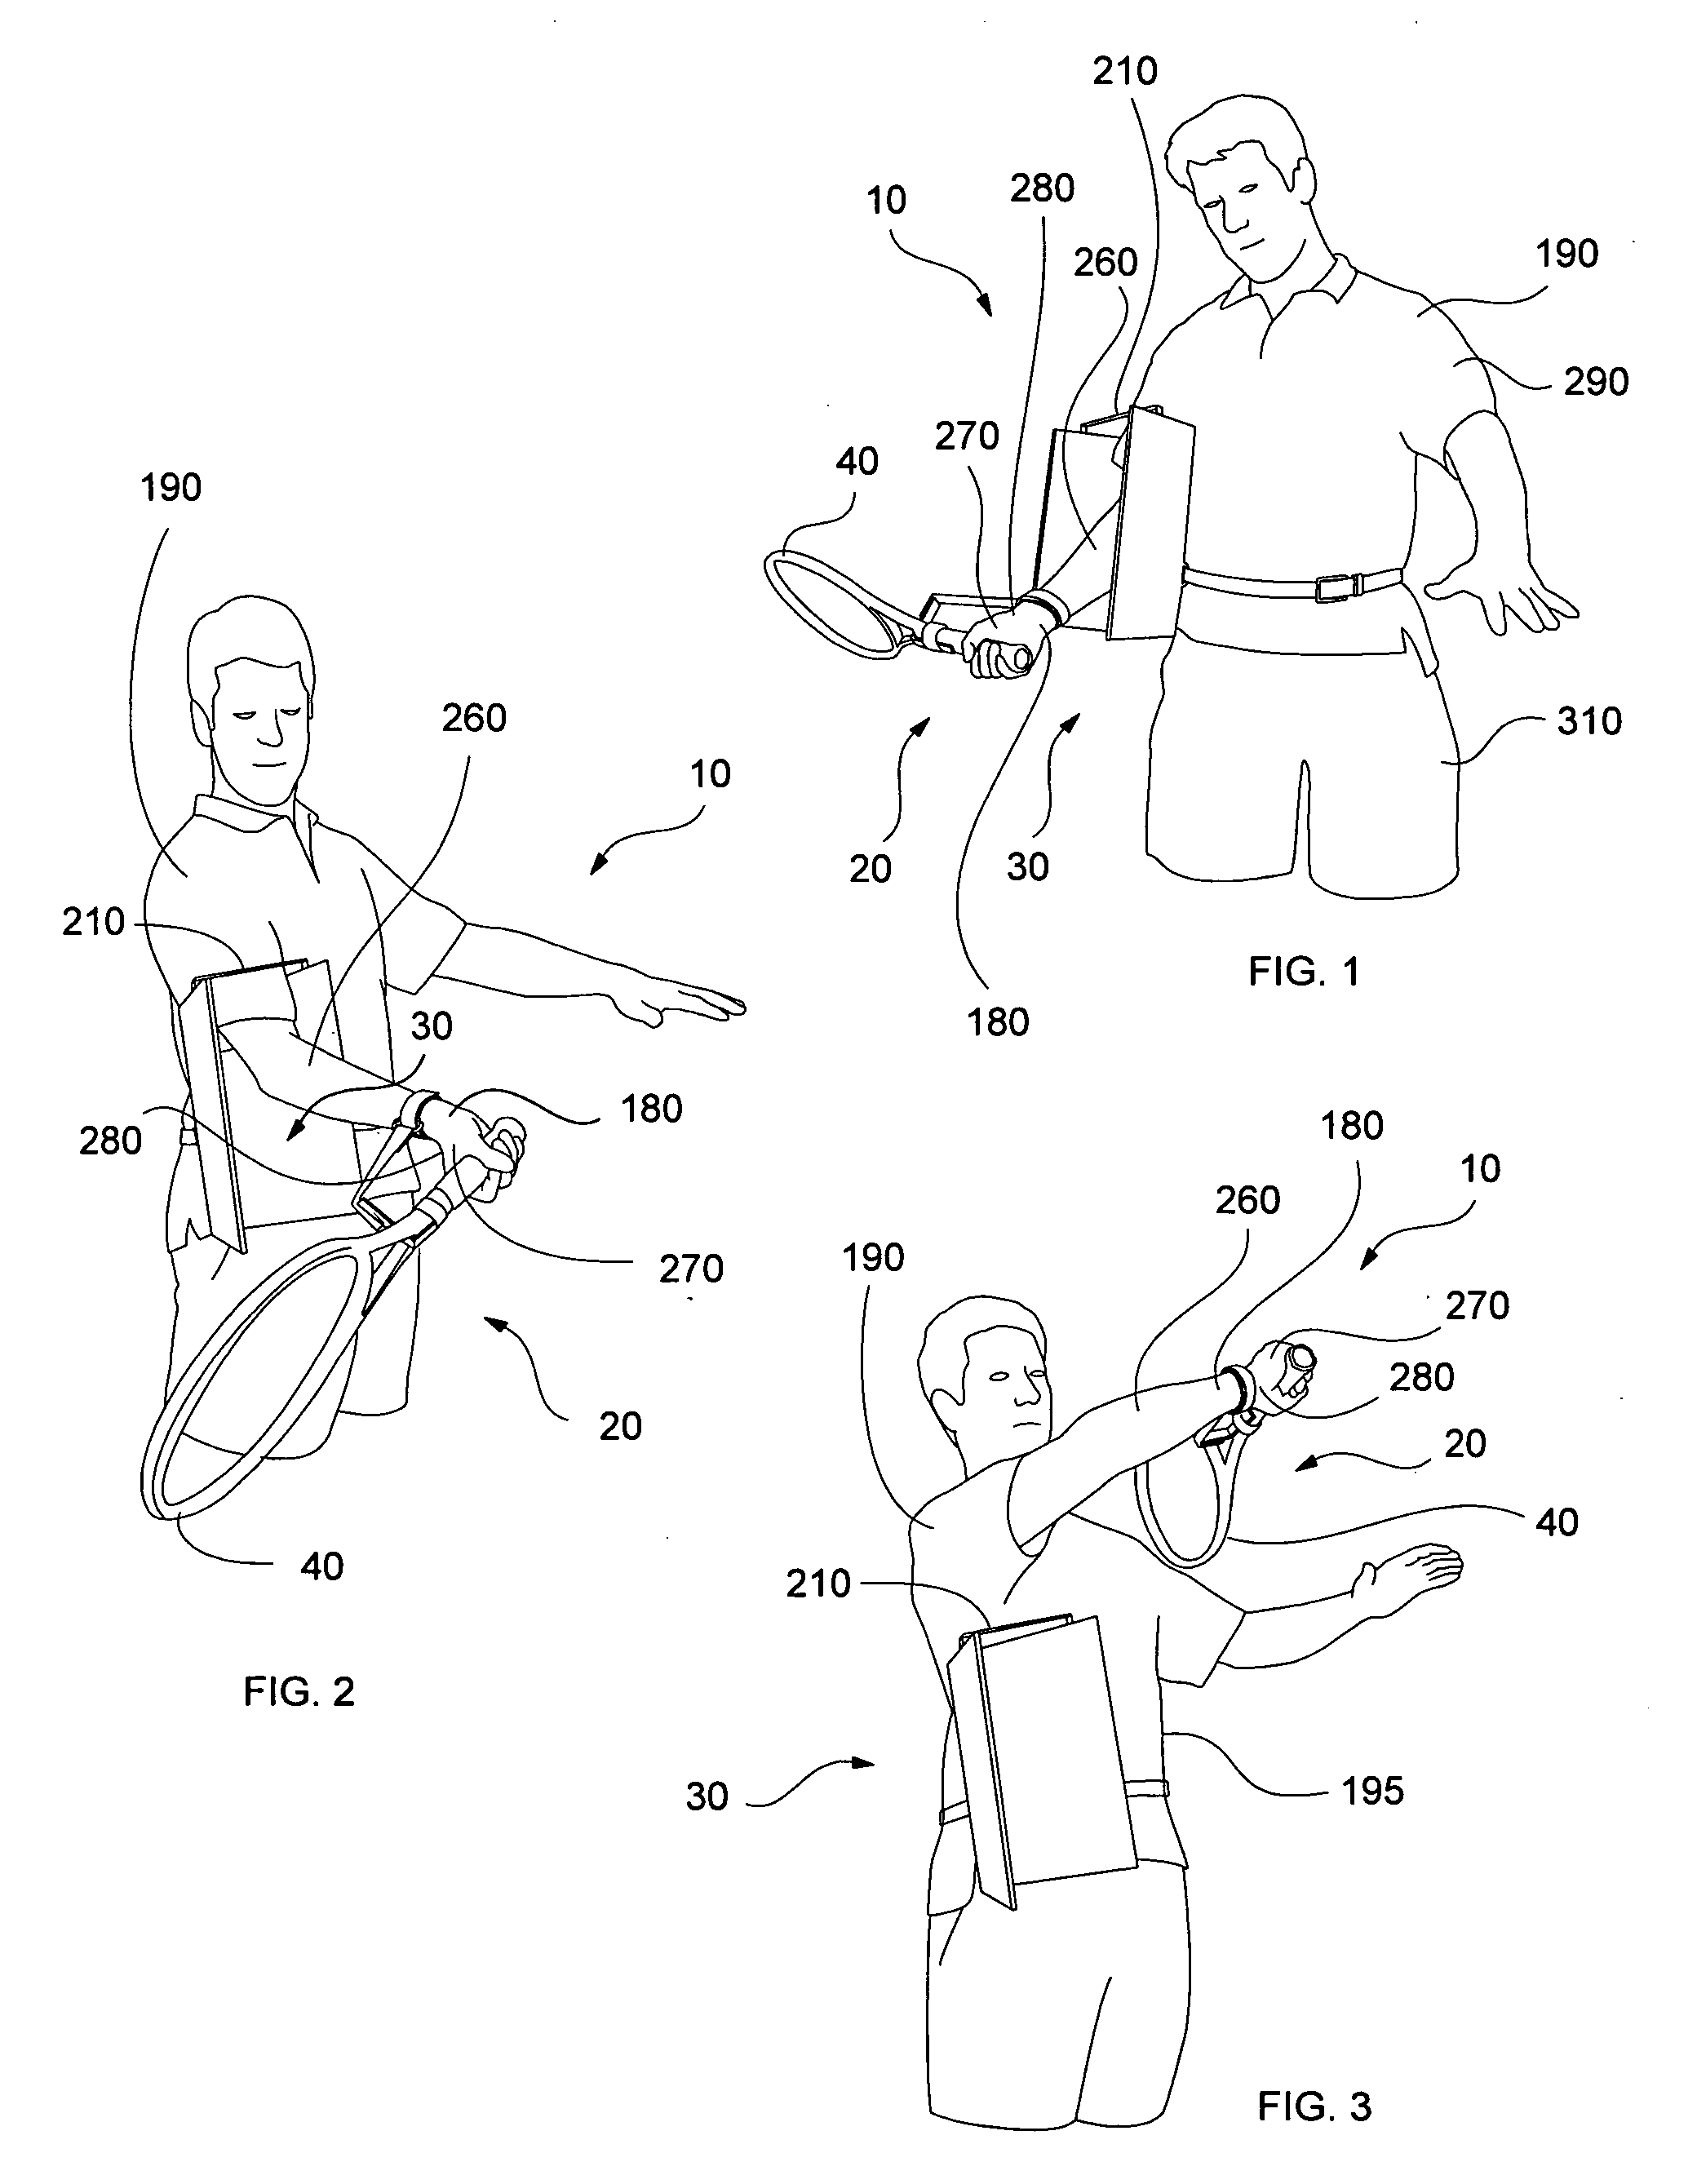 Tennis training apparatus and method of use thereof